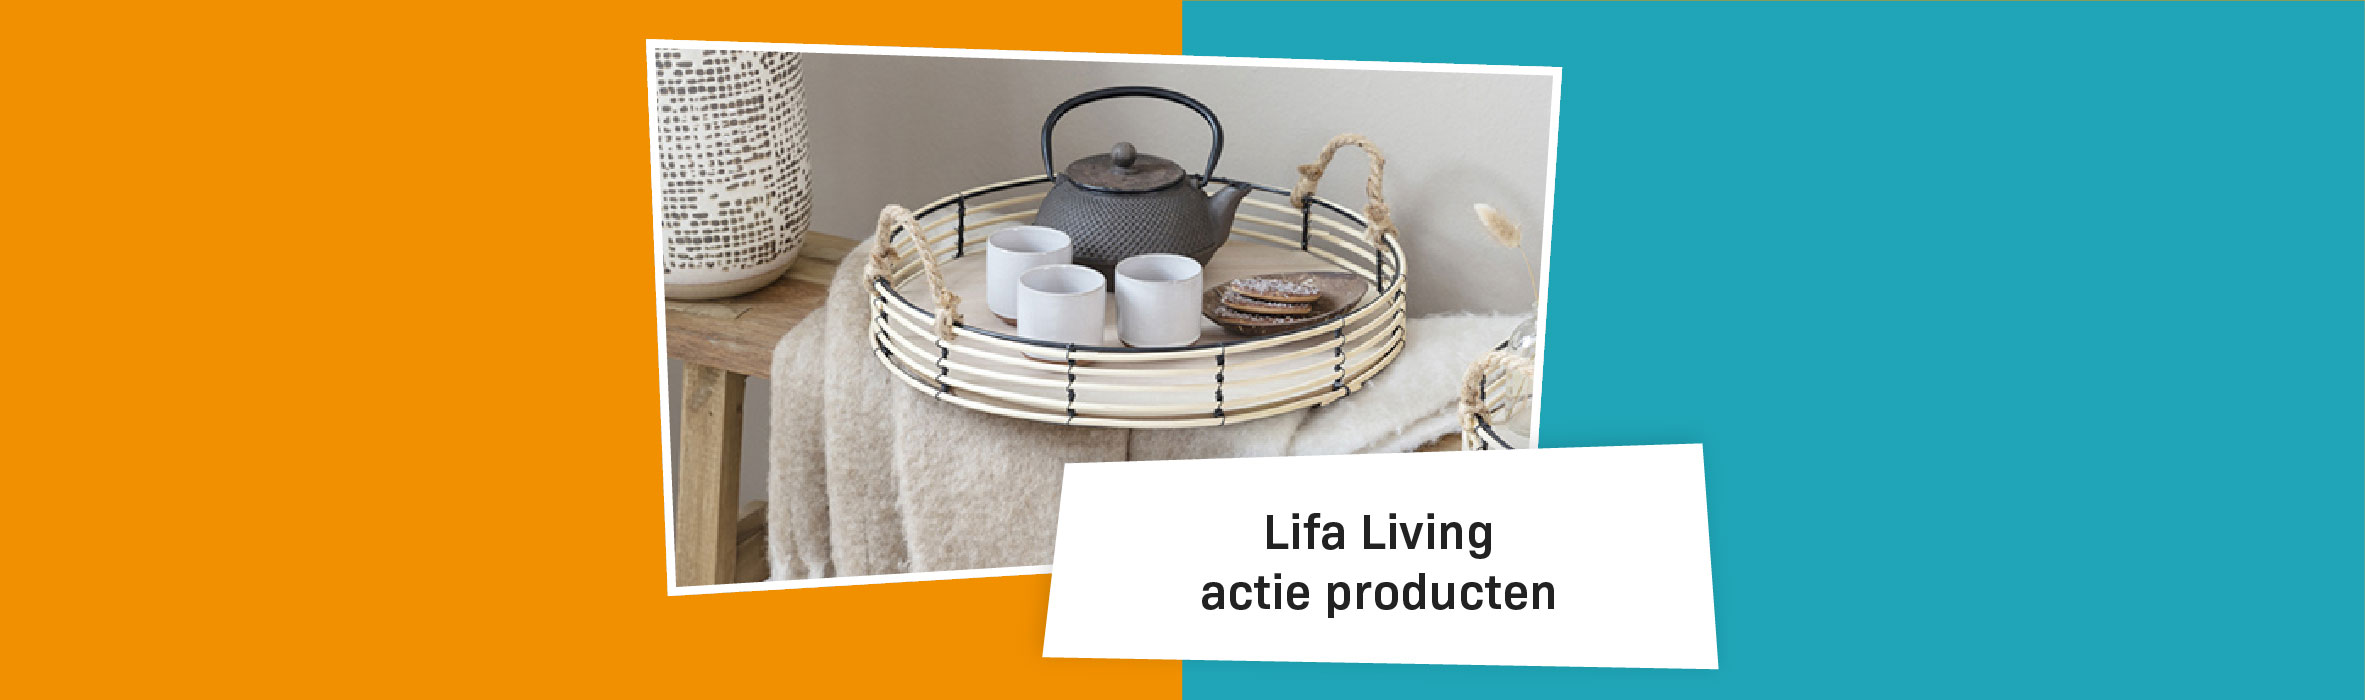 Lifa Living Promotion Products